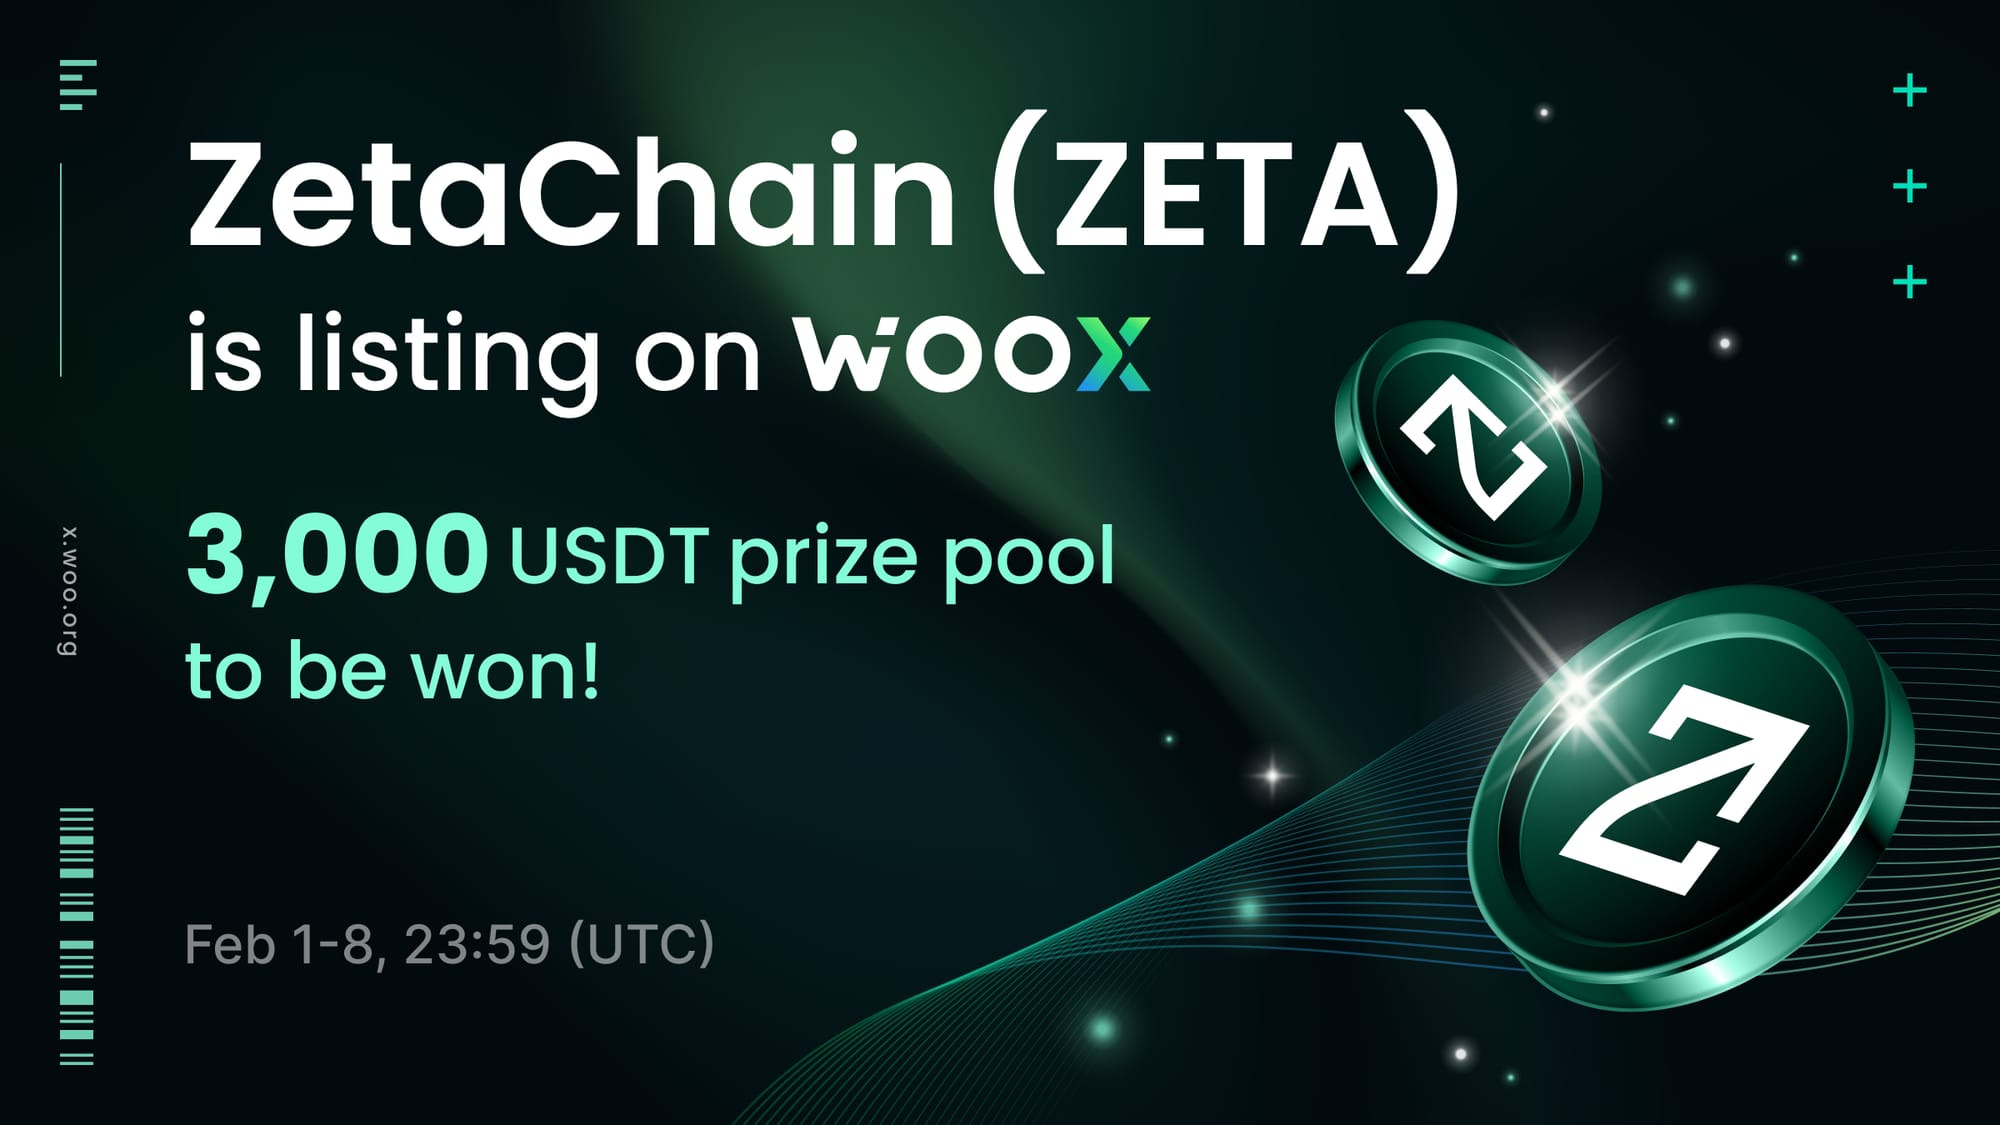 New Listing: ZetaChain (ZETA) on WOO X - Trade and share a 3,000 USDT prize pool!